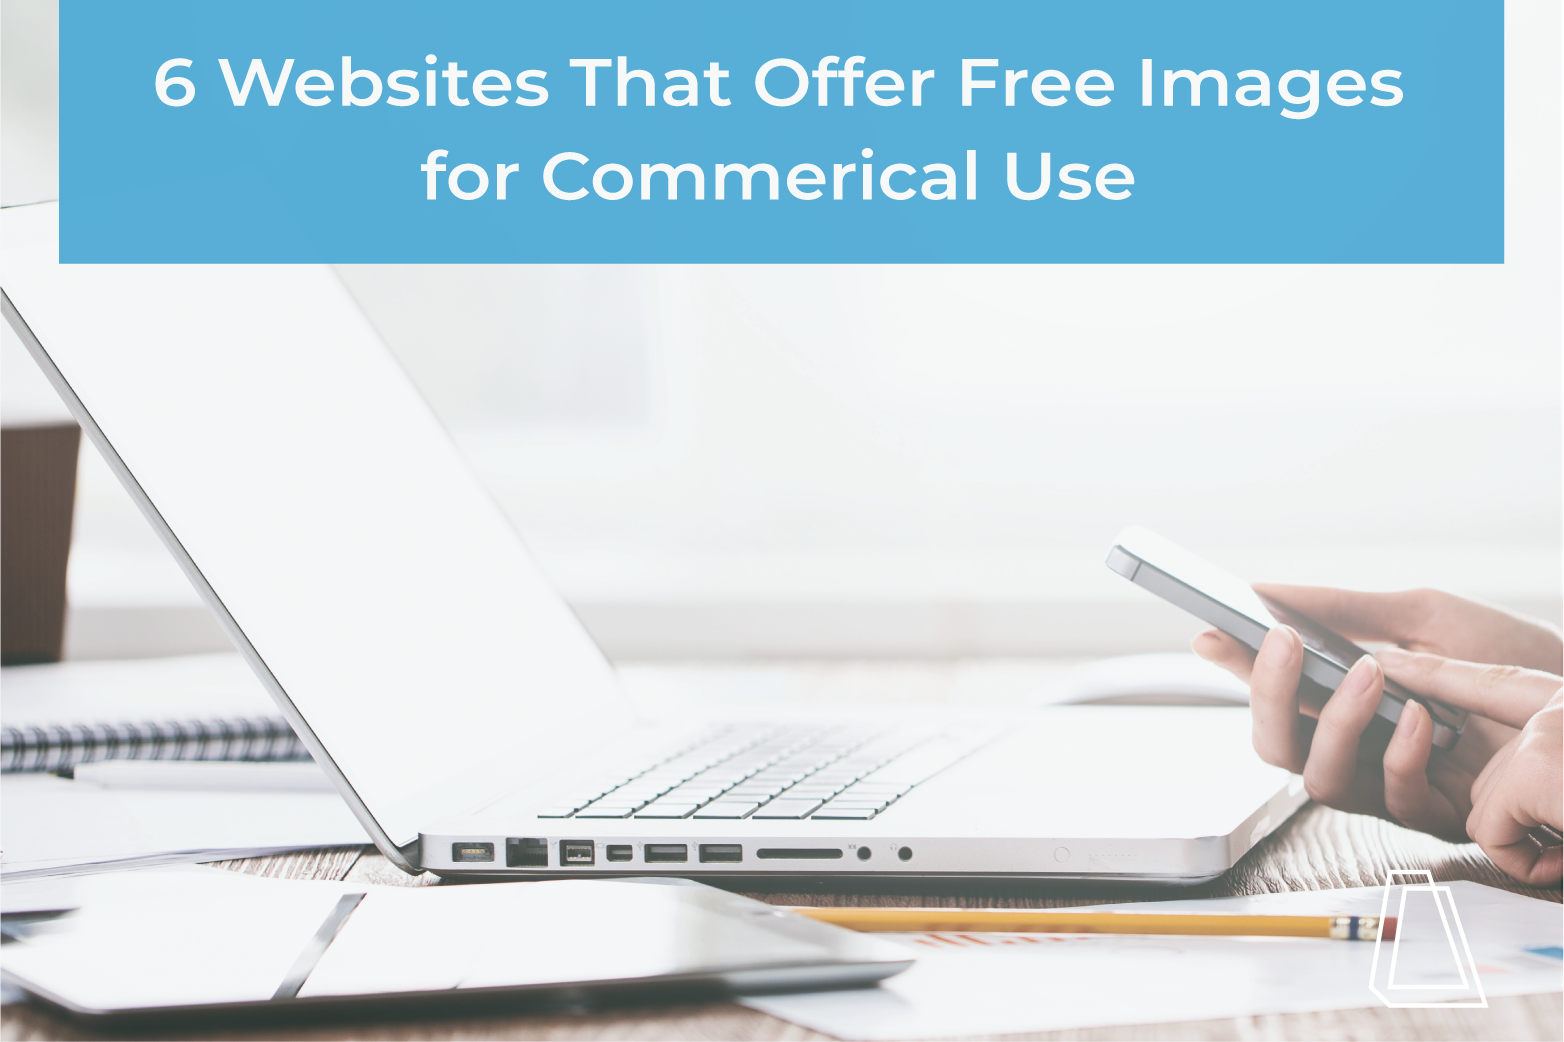 6 WEBSITES THAT OFFER FREE IMAGES FOR COMMERCIAL USE